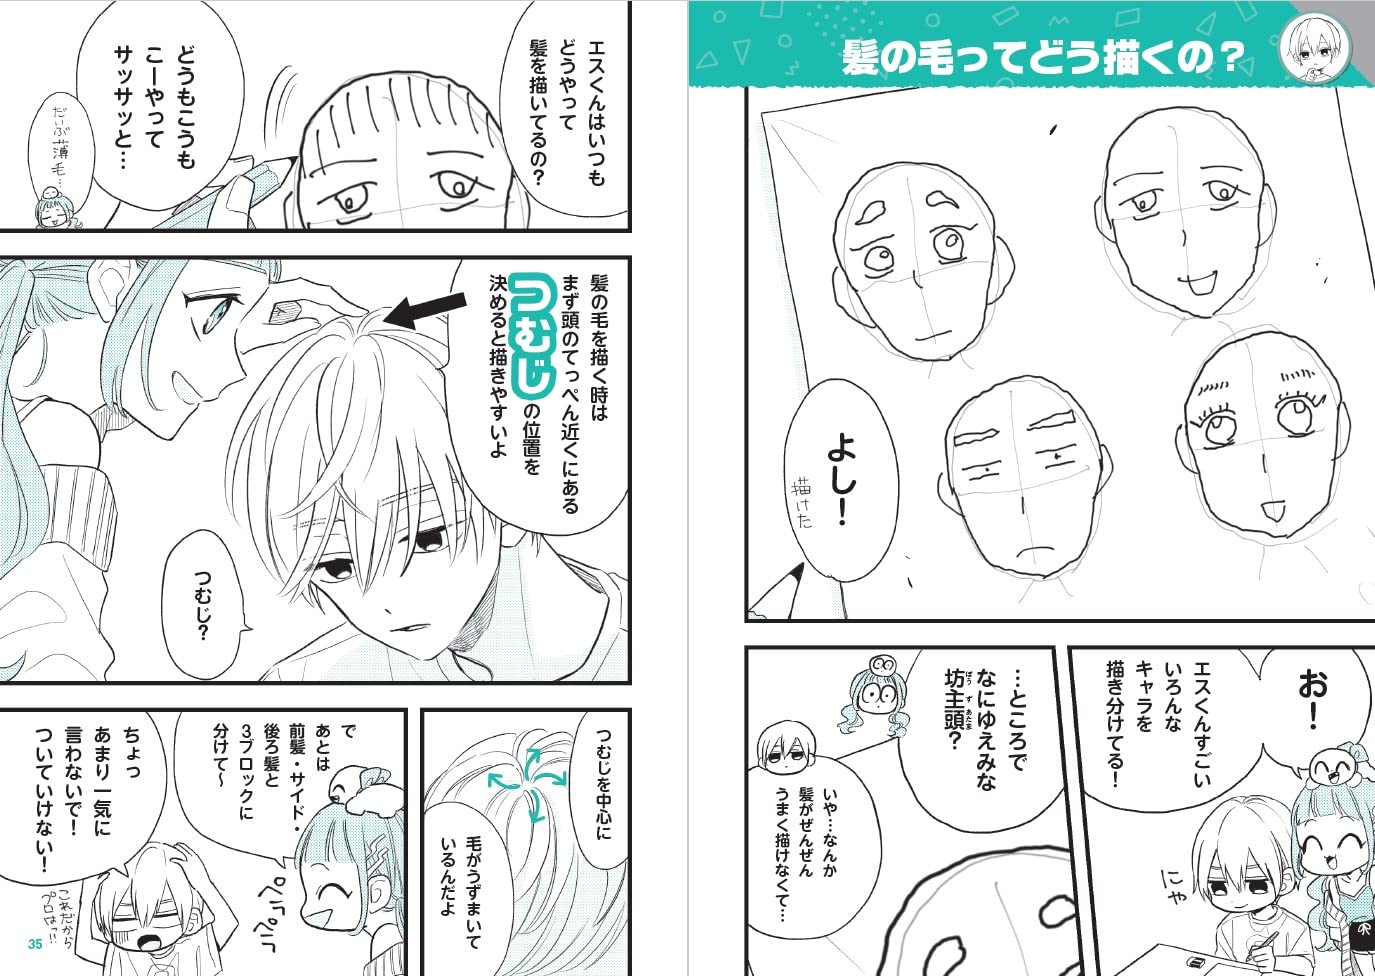 Super Easy! How To Draw Shinmoto-style Manga Characters